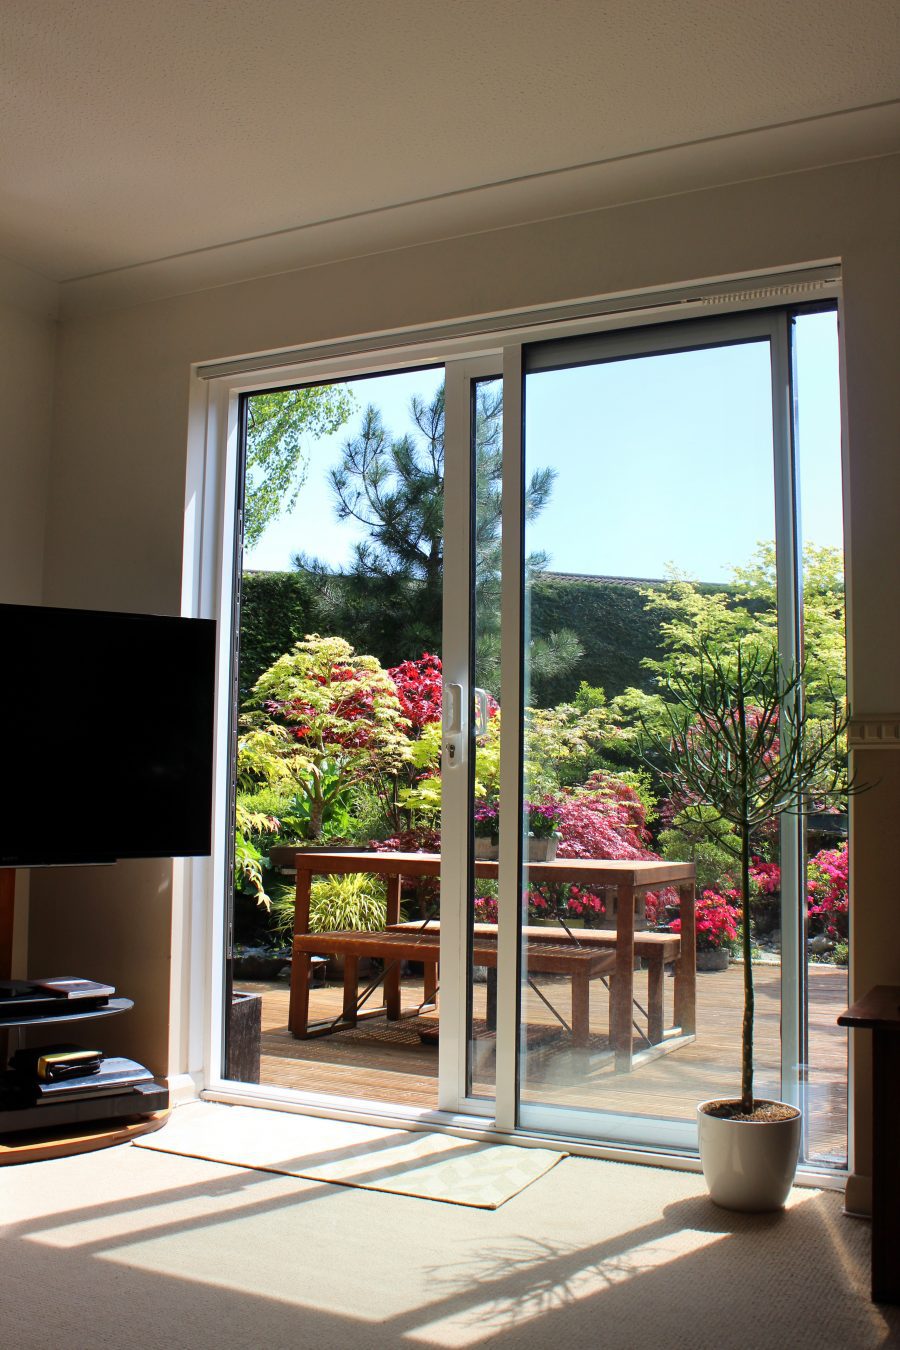 Let the Fresh Air in with Retractable Screens